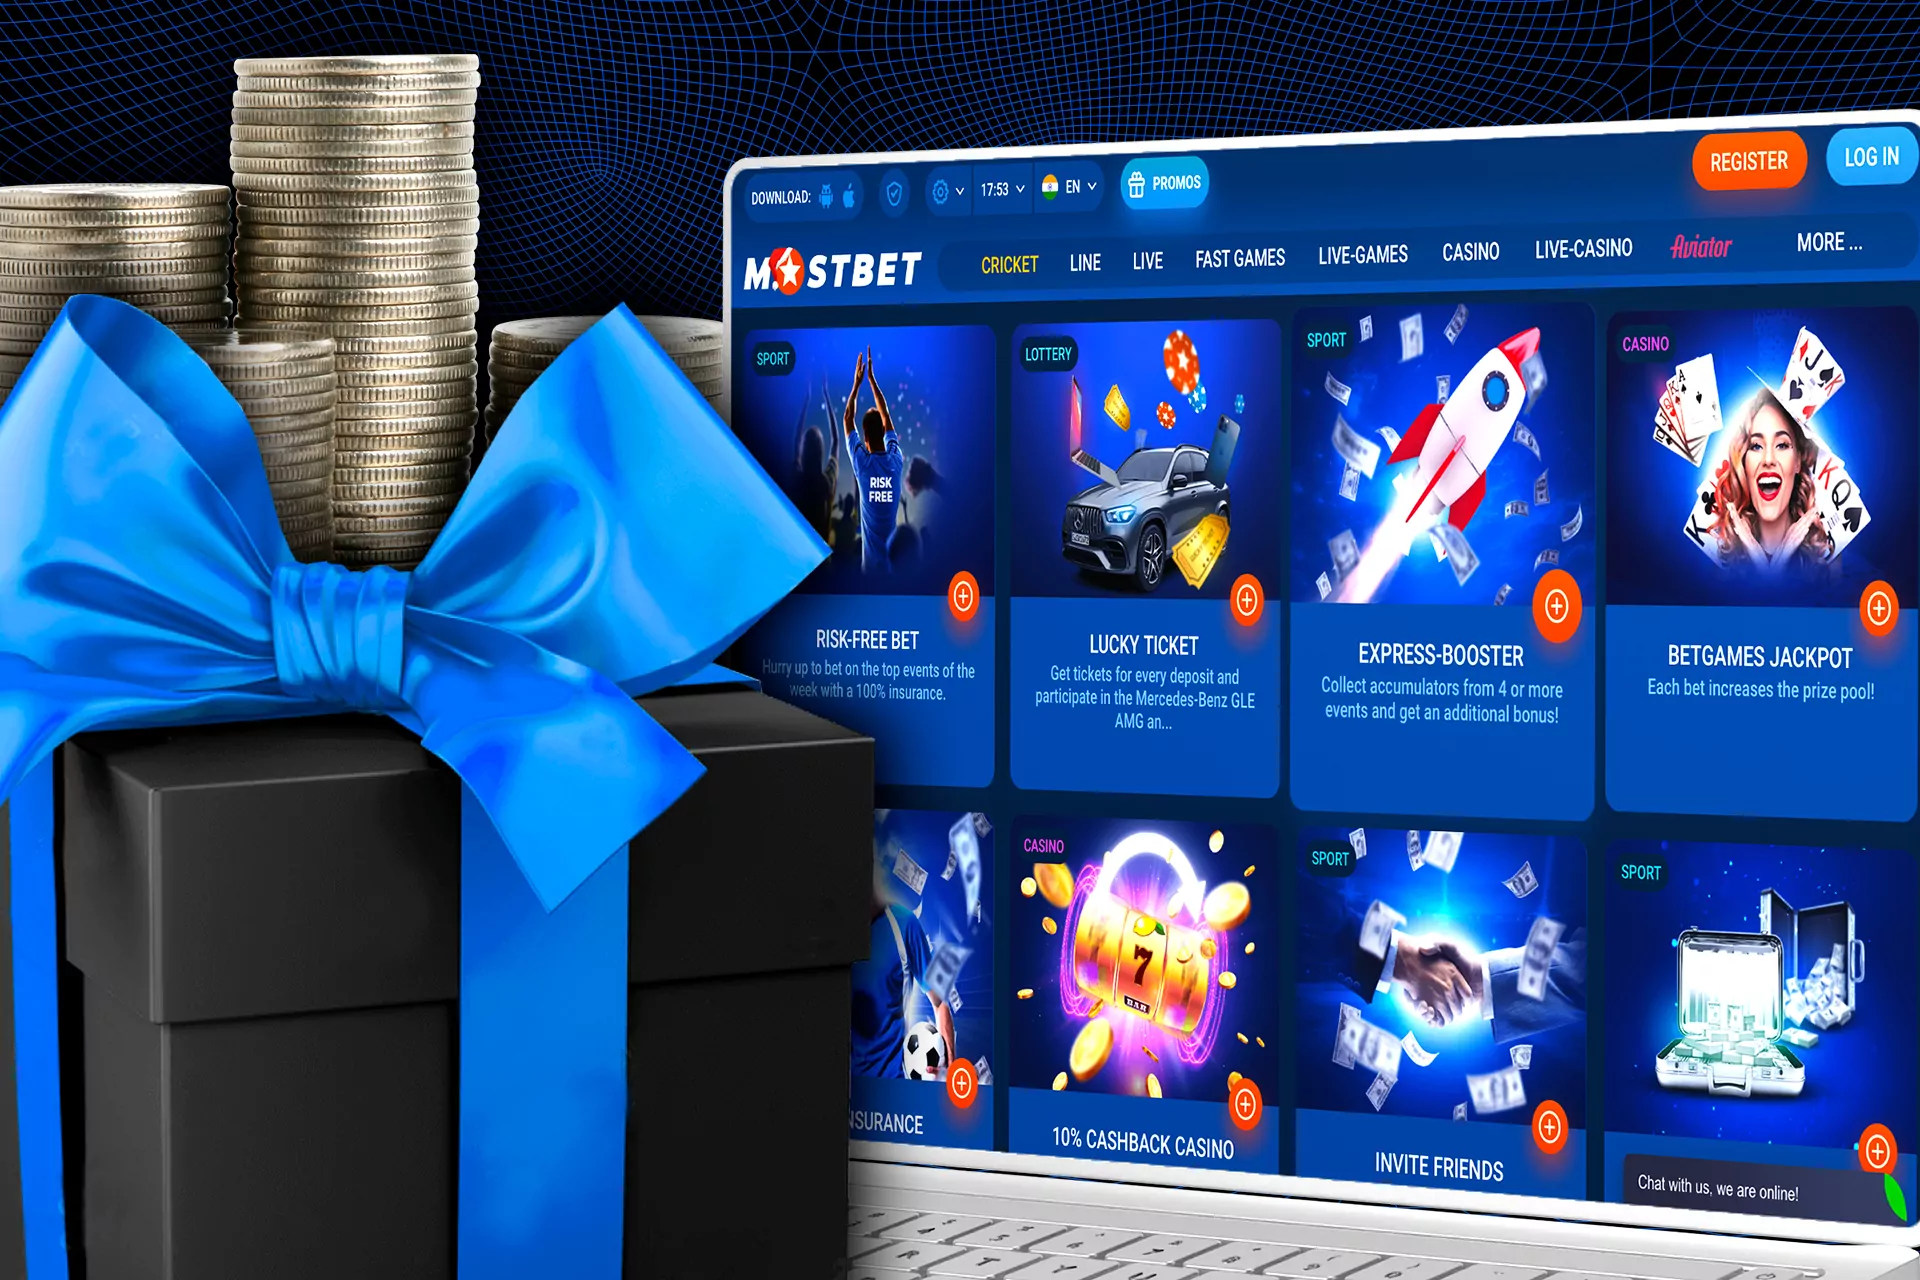 Besides a welcome offer, at Mostbet you find lots of other types of bonuses and promotions.